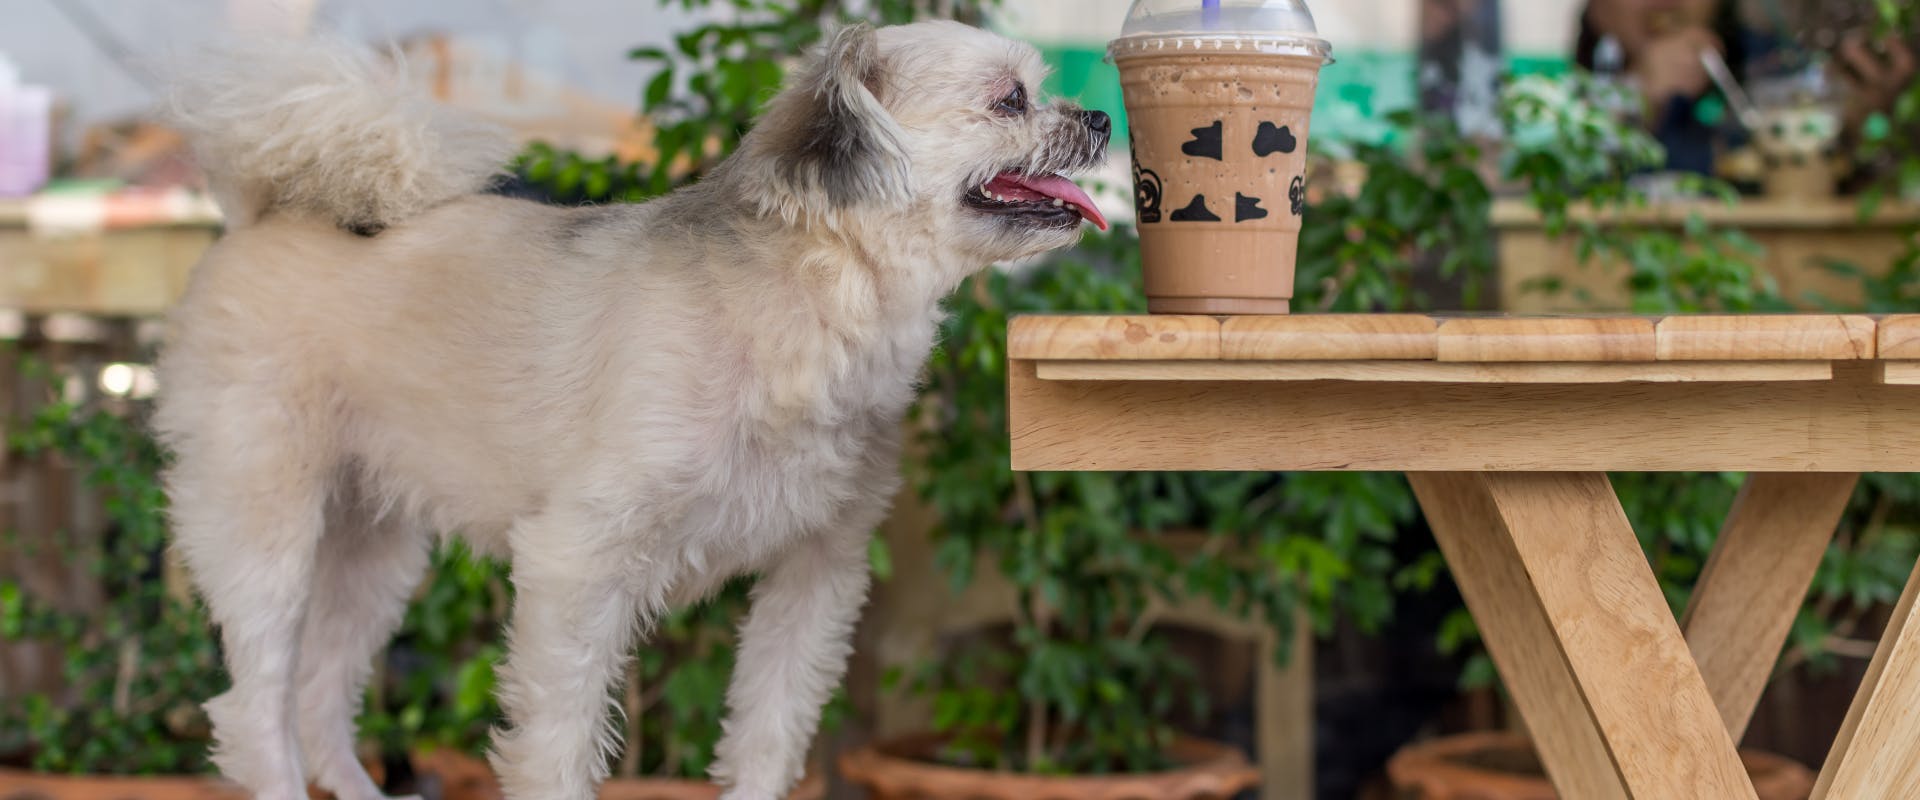 small dog stood on a picnic bench sniffing an iced coffee in a outside patio